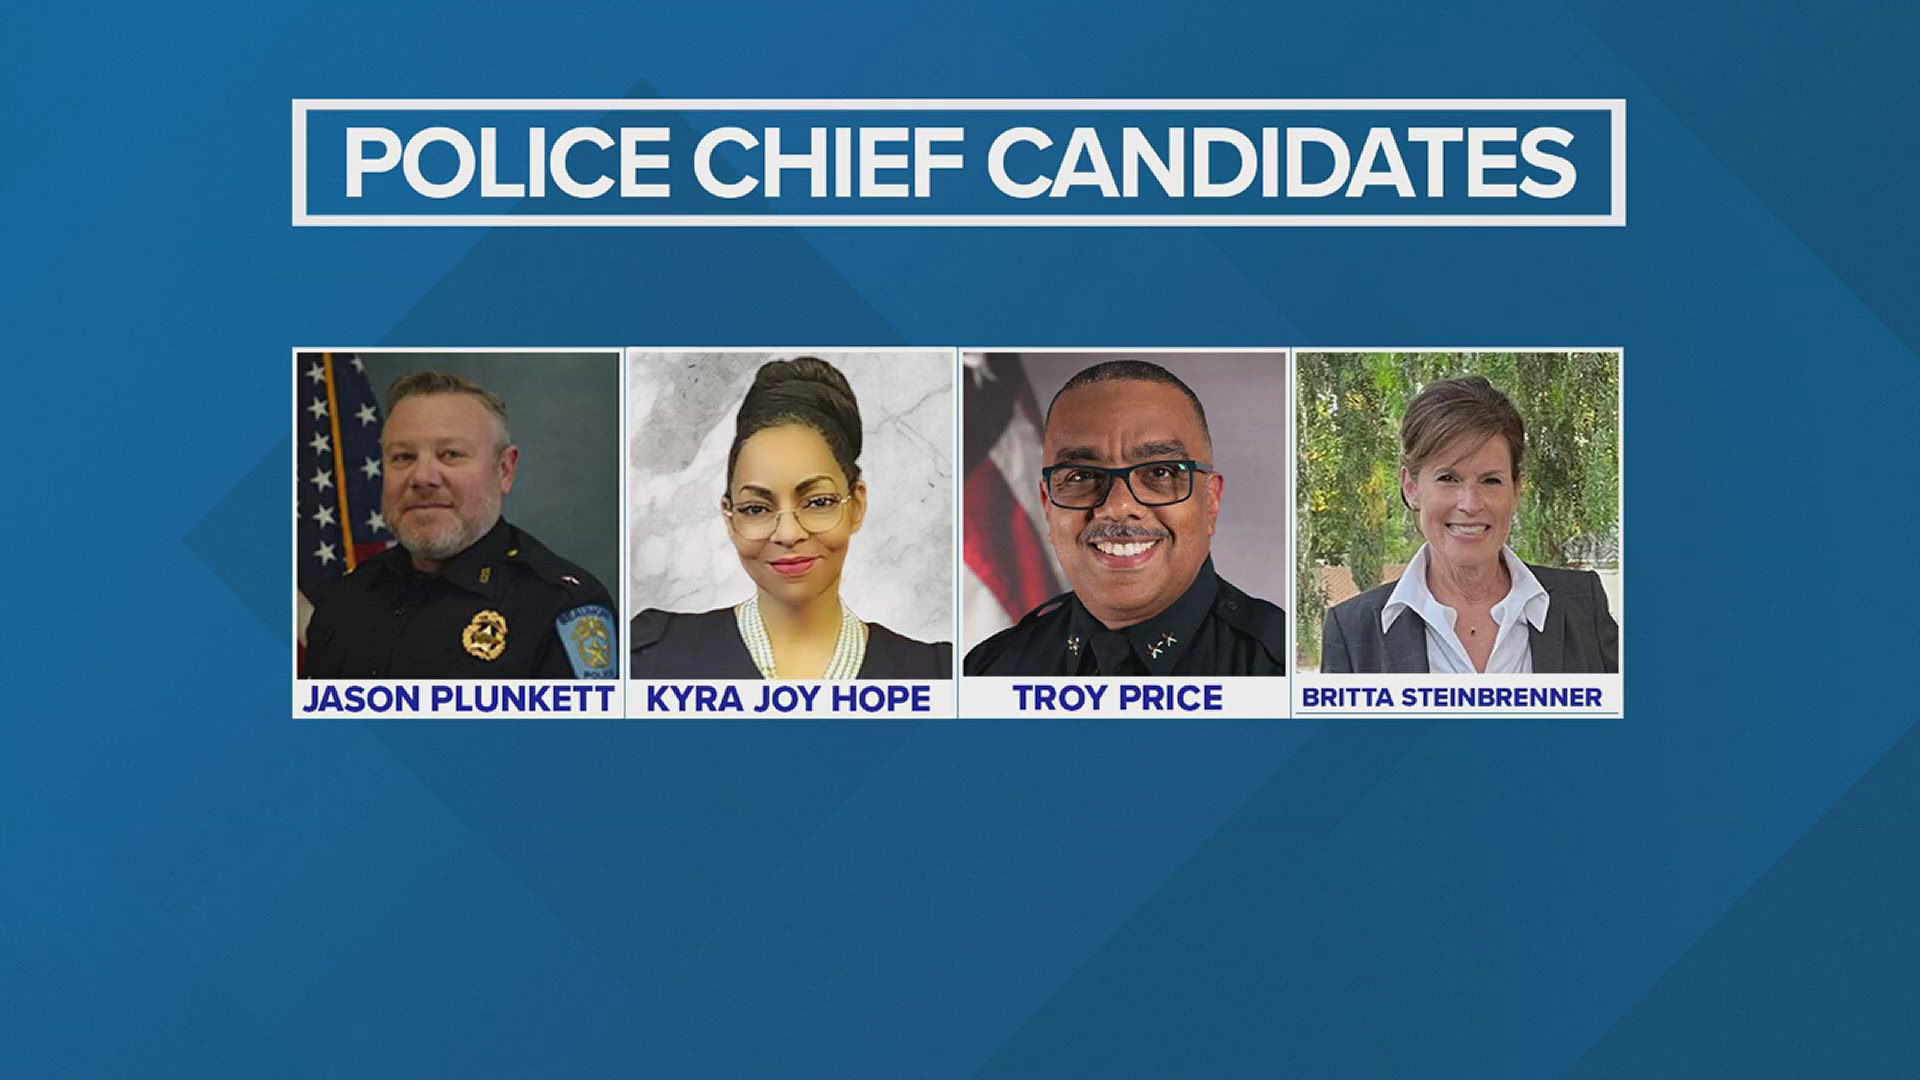 12News spoke to all four candidates and the common theme among them was increased community and police interaction.